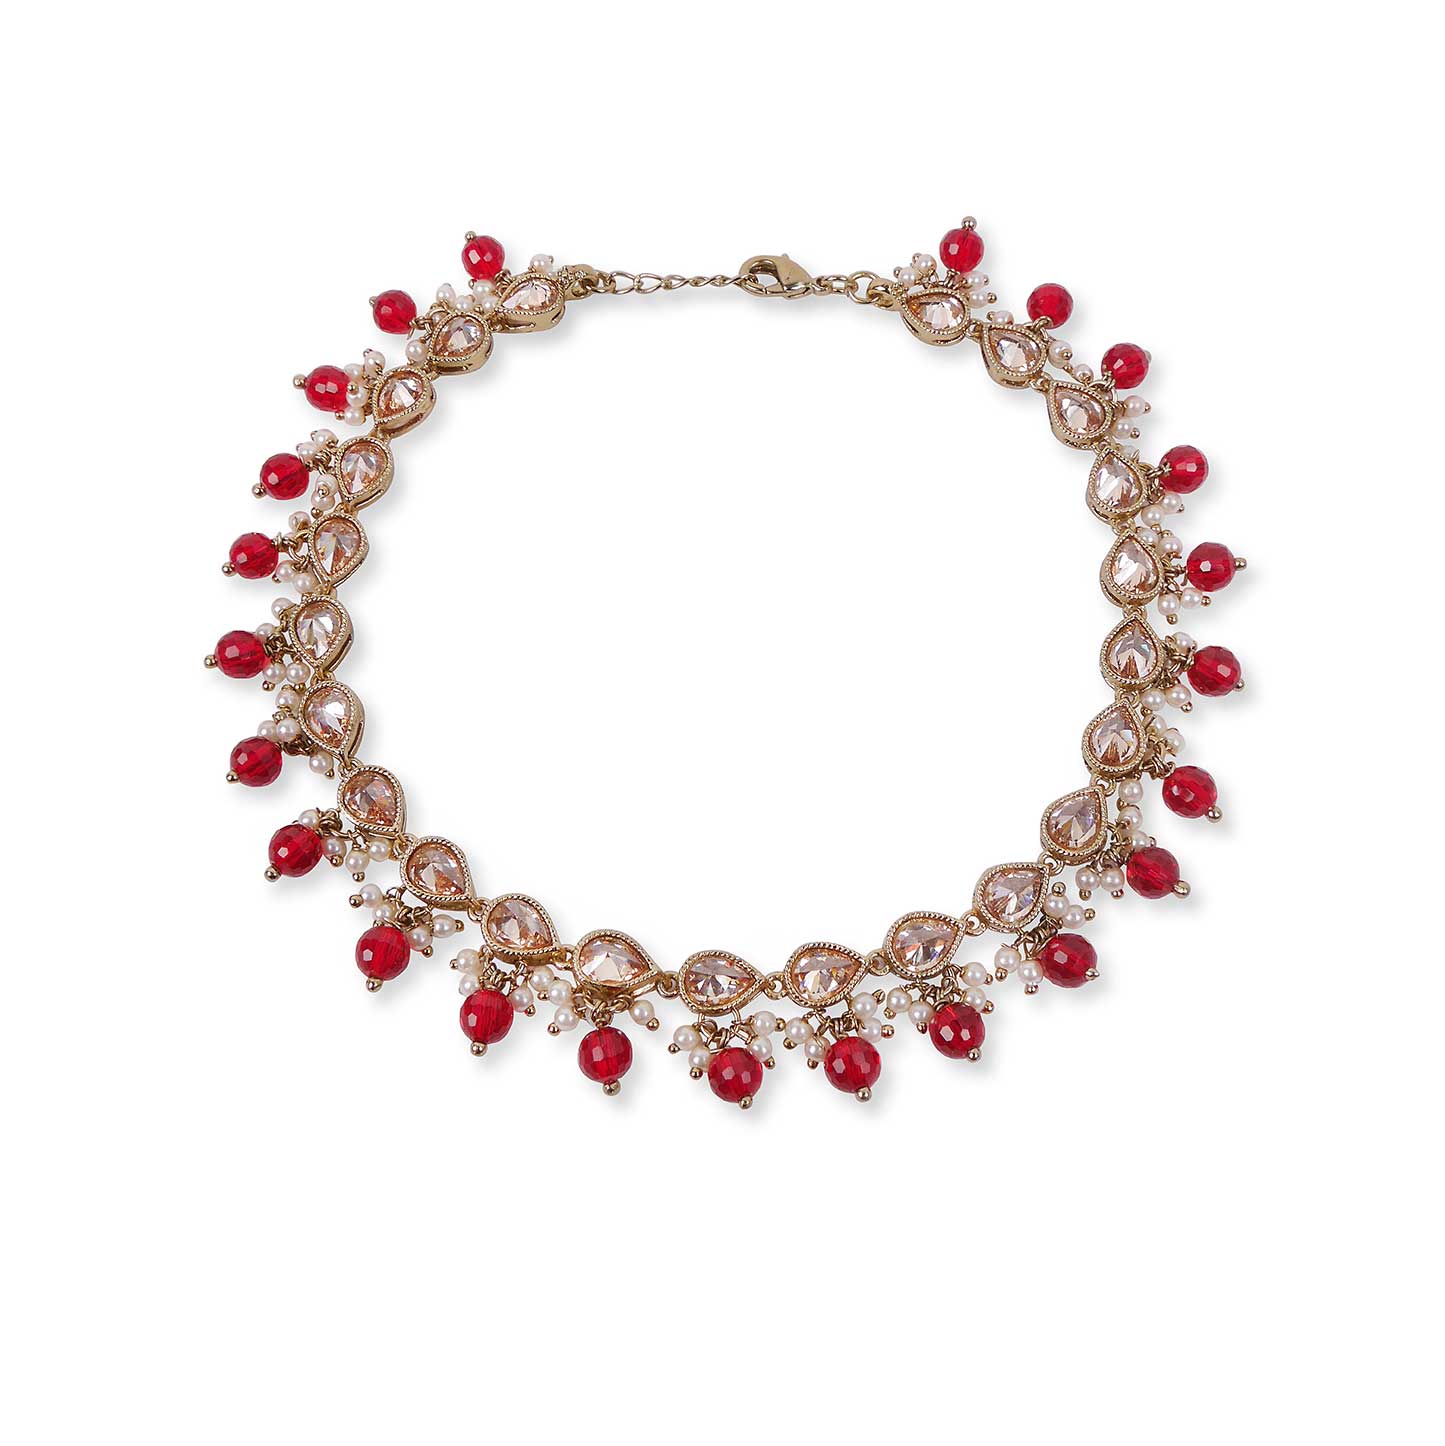 Cluster Anklet in Pearl and Maroon Bead